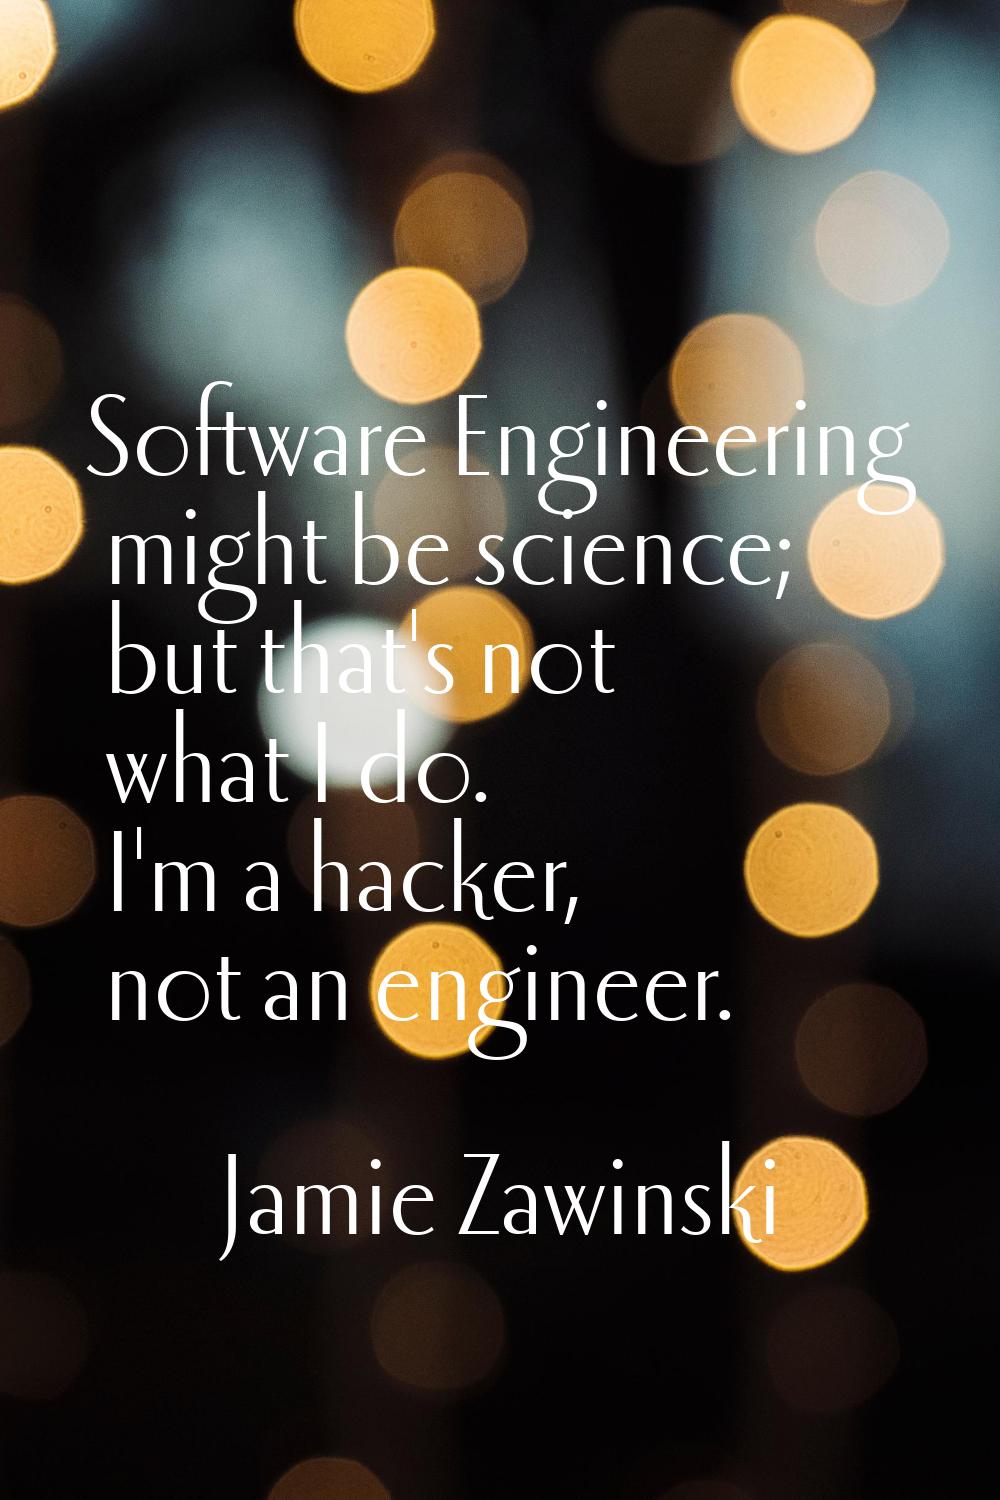 Software Engineering might be science; but that's not what I do. I'm a hacker, not an engineer.